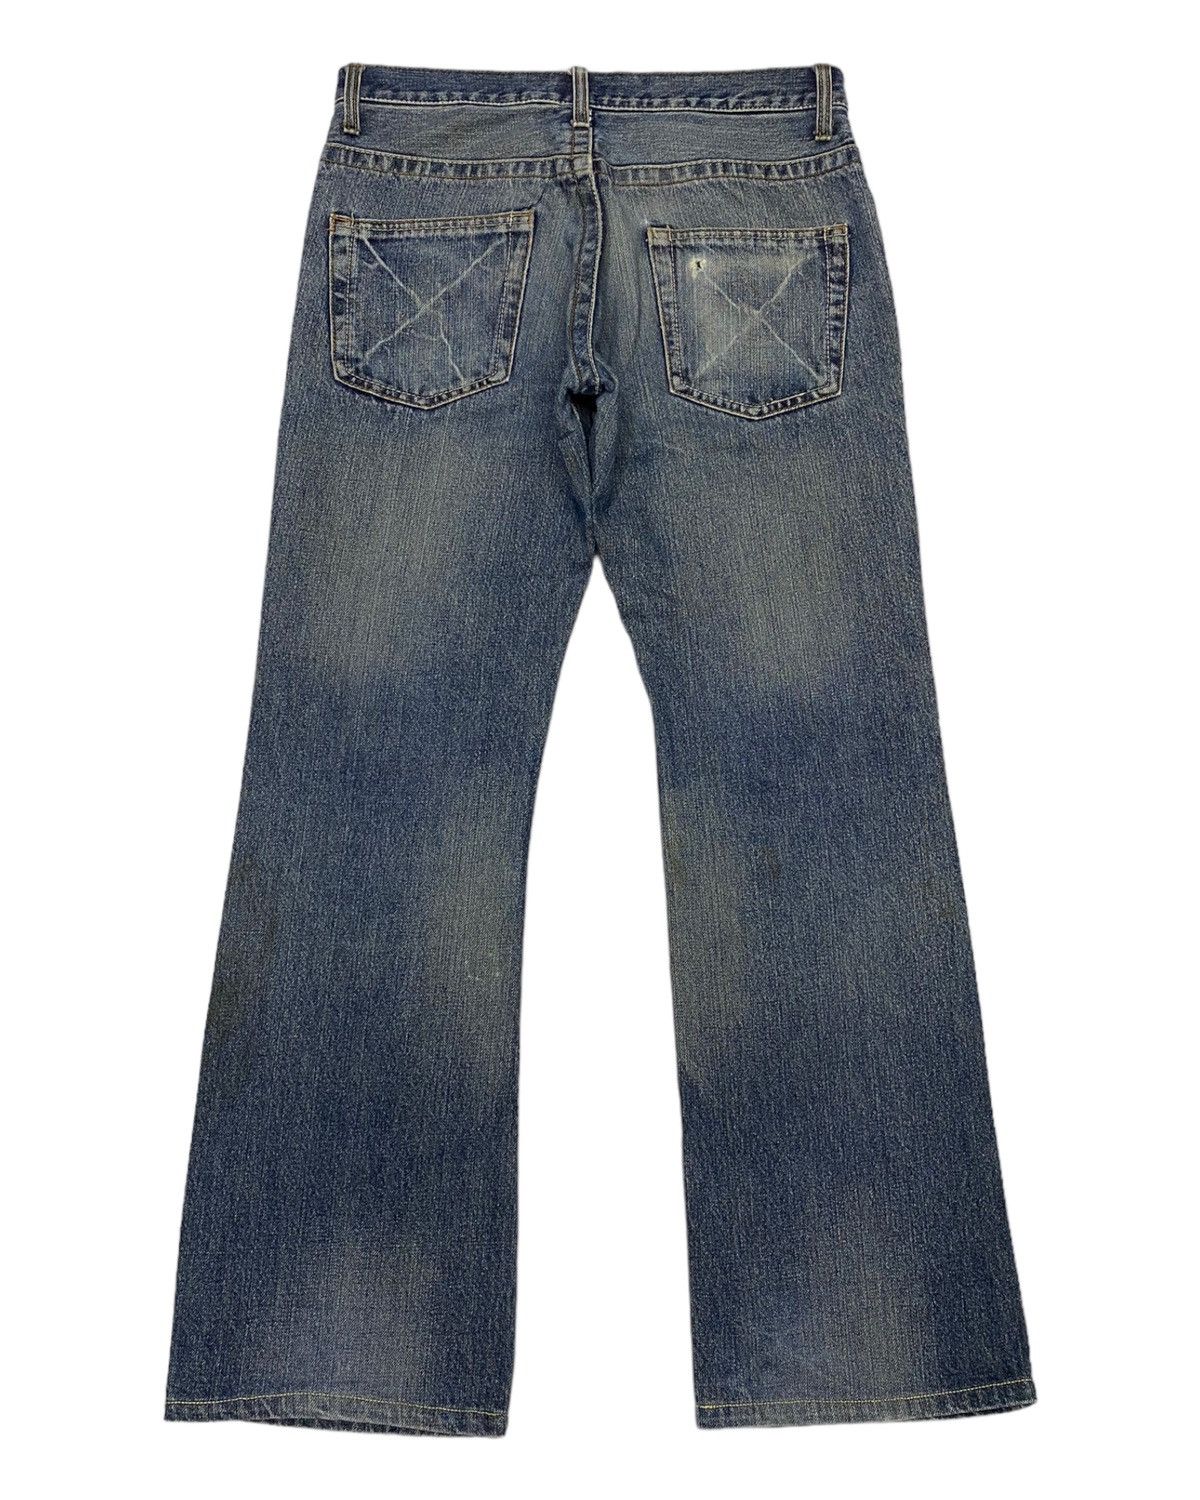 Archival Clothing - FLARED🔥ROOT THREE DISTRESSED DENIM JEANS - 2